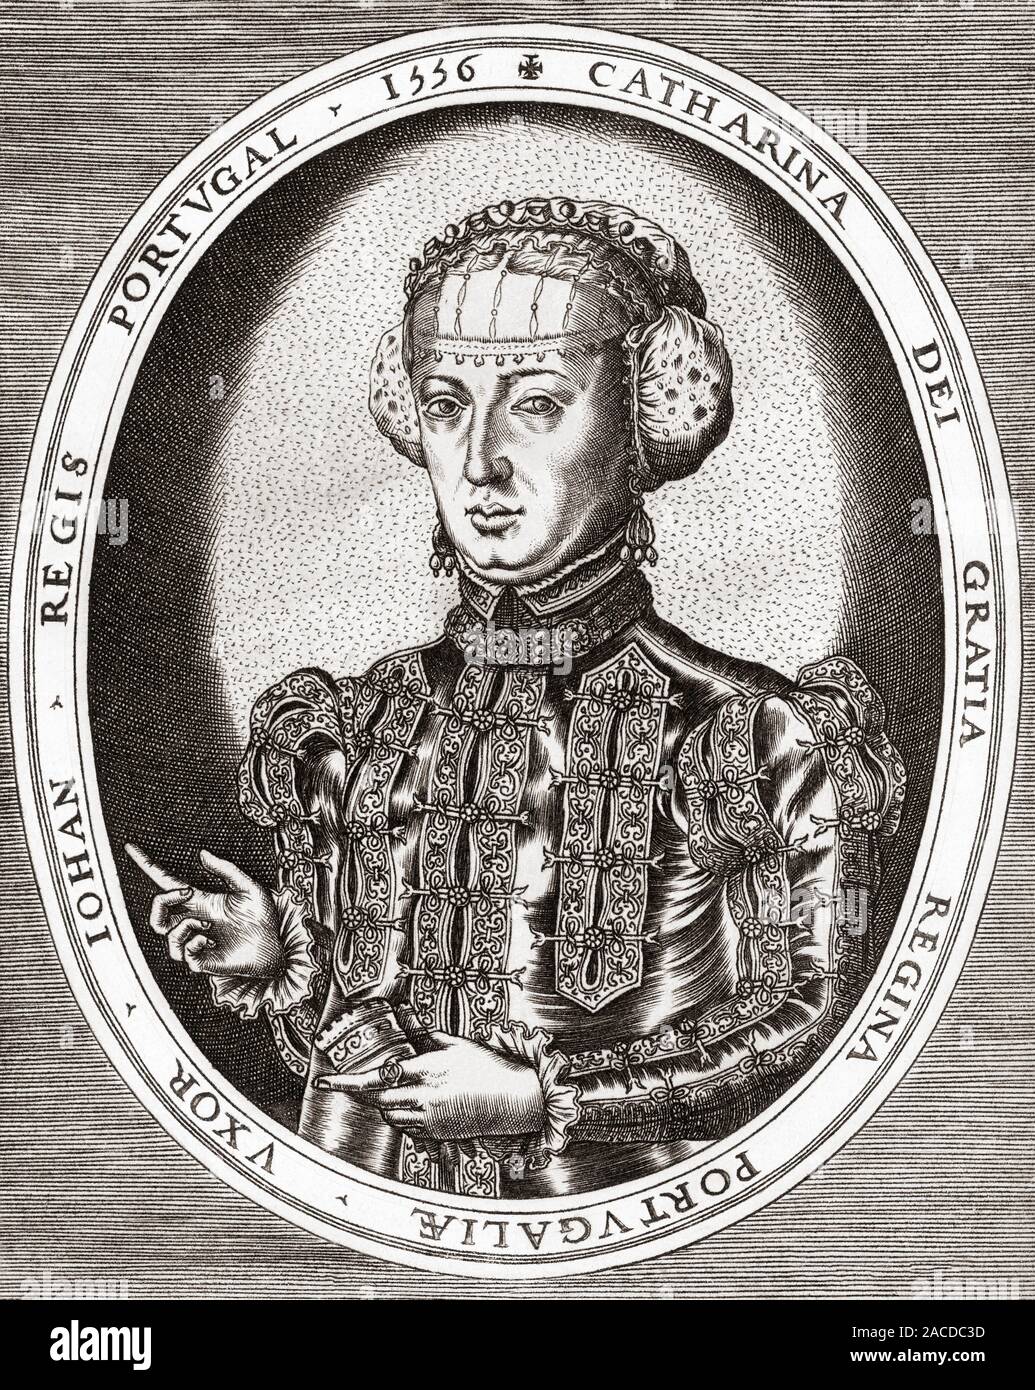 Catherine of Austria, Queen of Portugal, 1507 - 1578.  Wife of King John III. Stock Photo